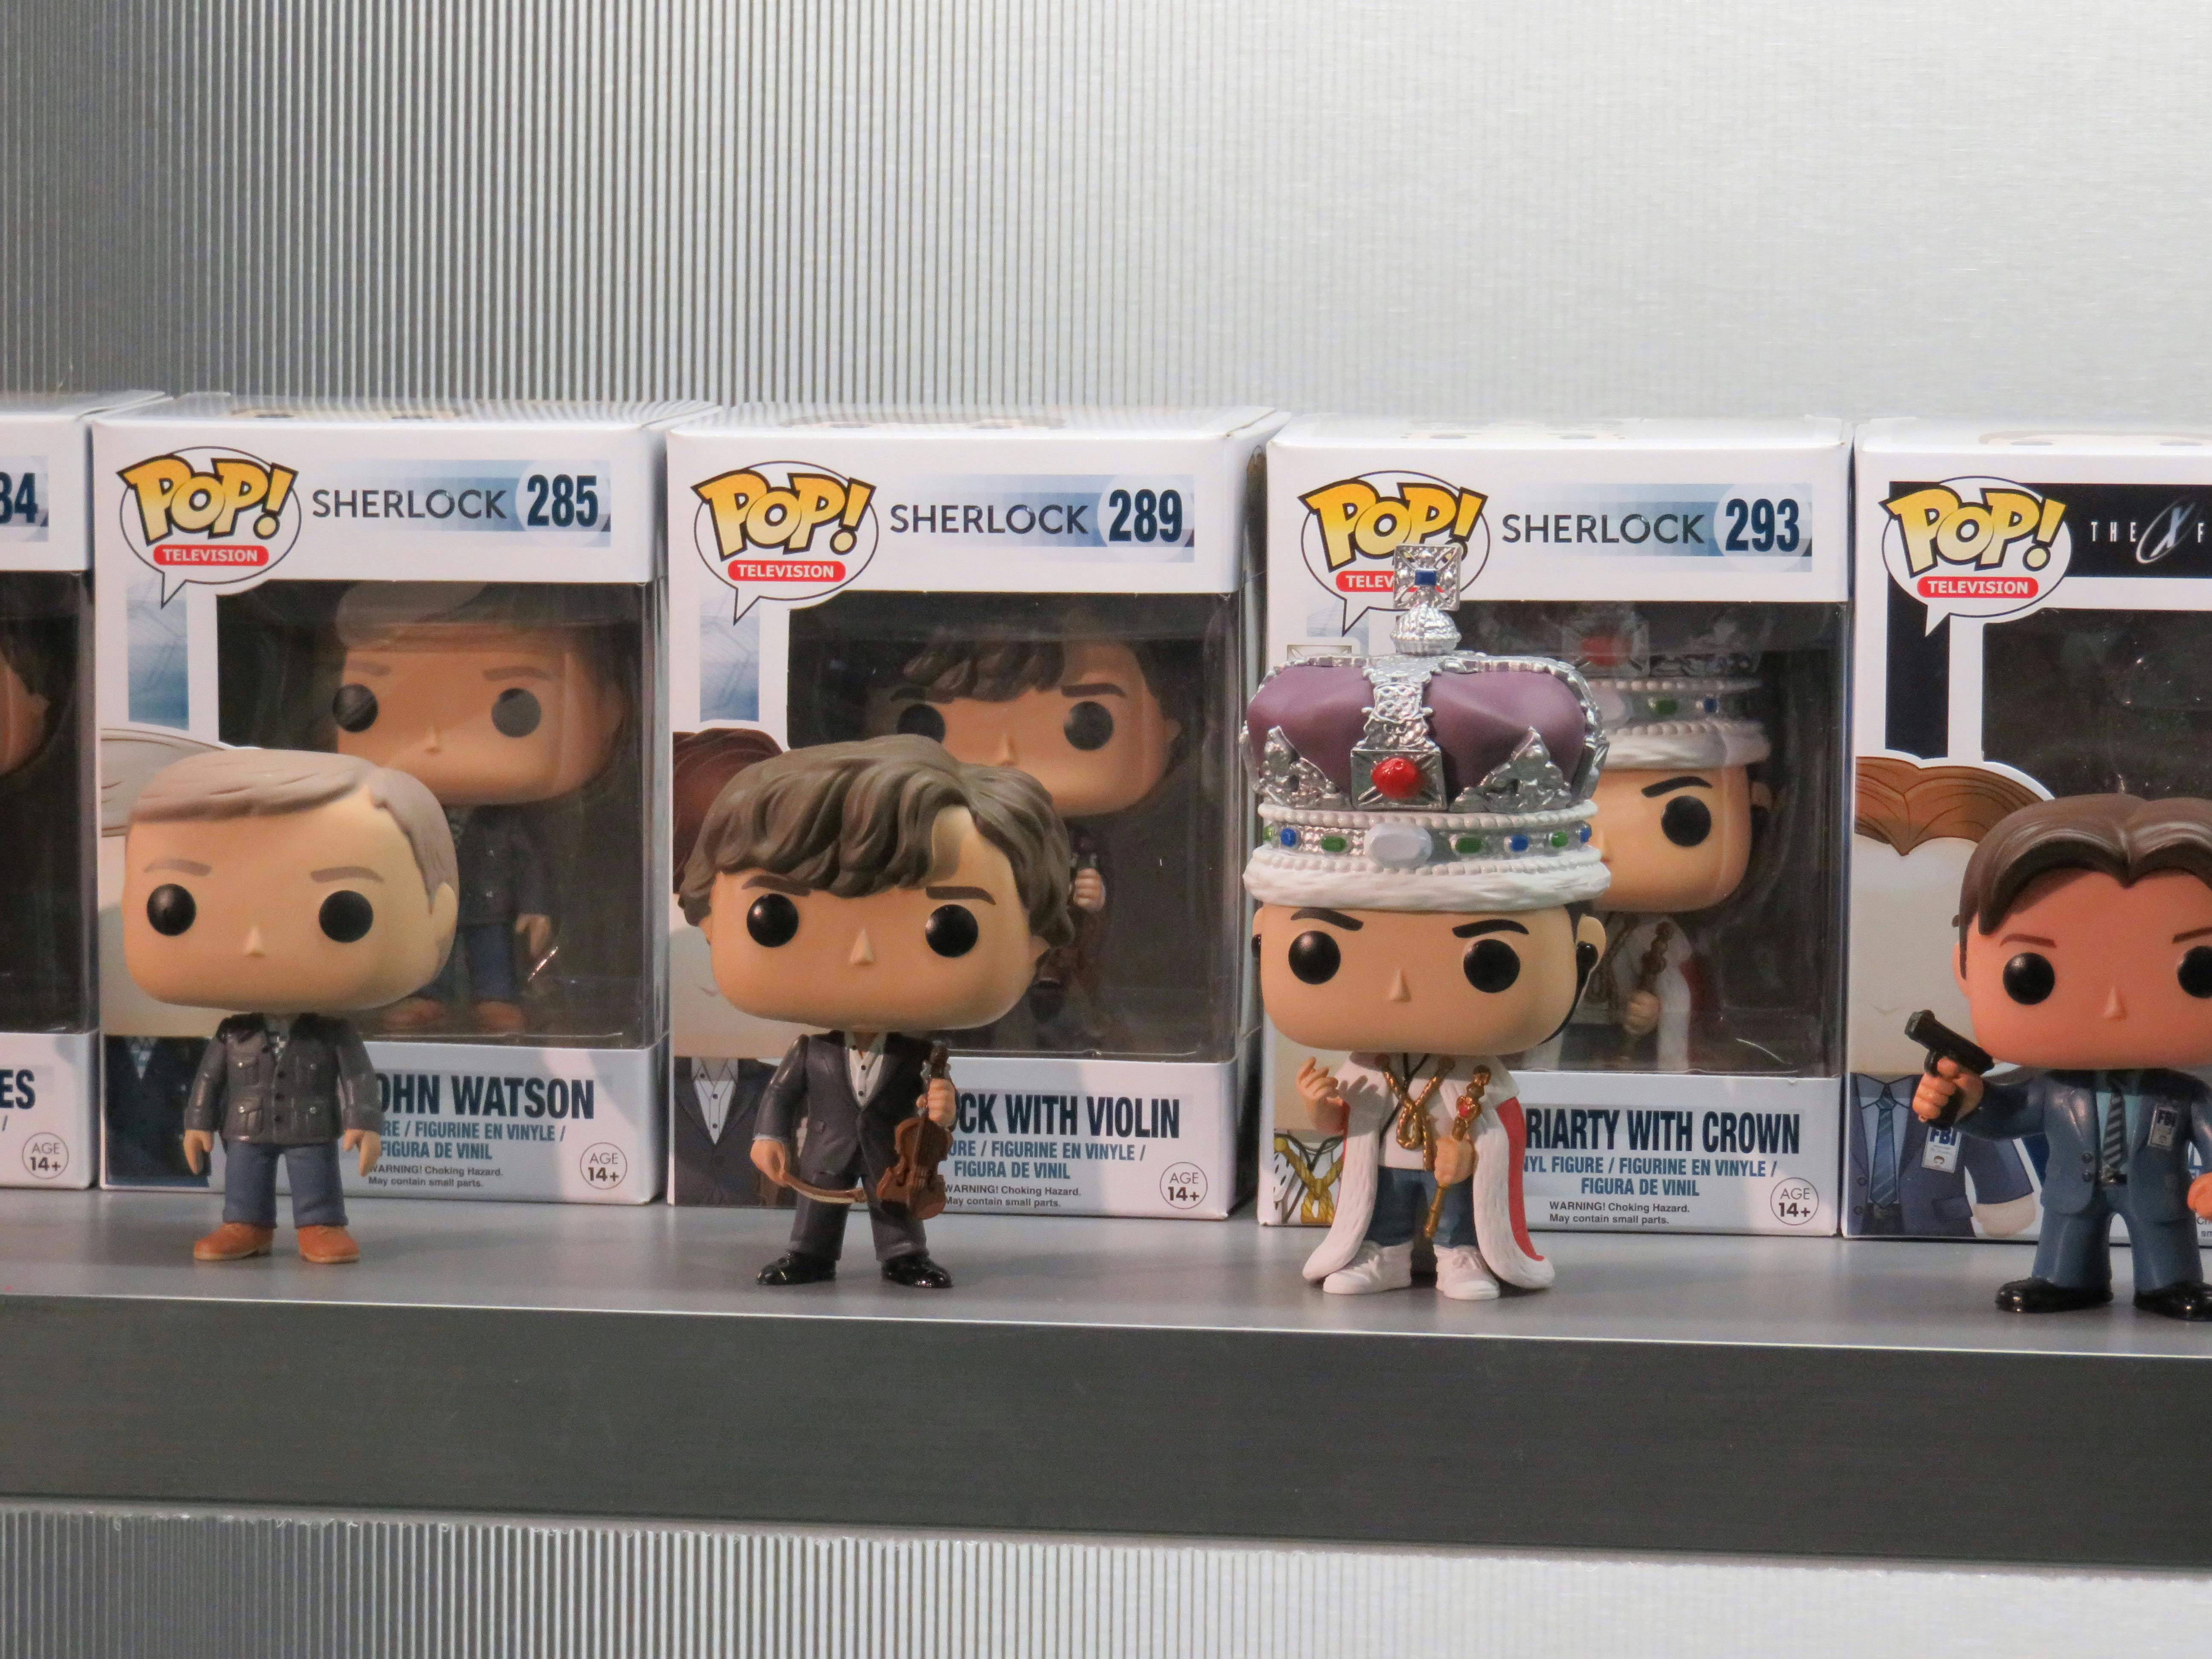 Funko 'Sherlock' line includes a new Moriarty with crown